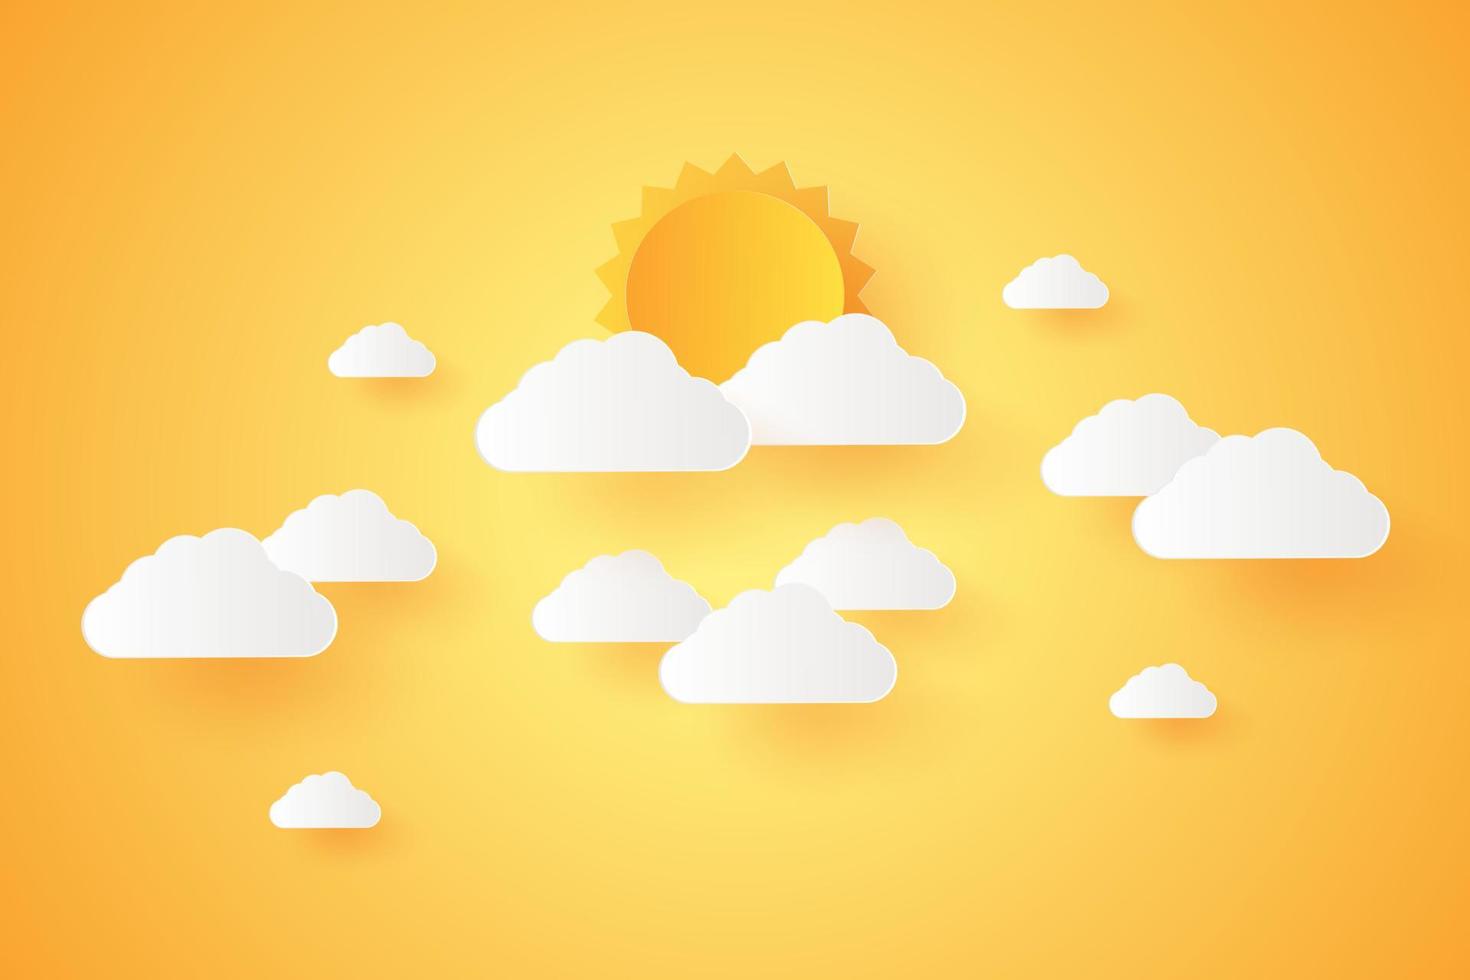 Summer Time, Cloudscape, sky with cloud and sun, paper art style vector